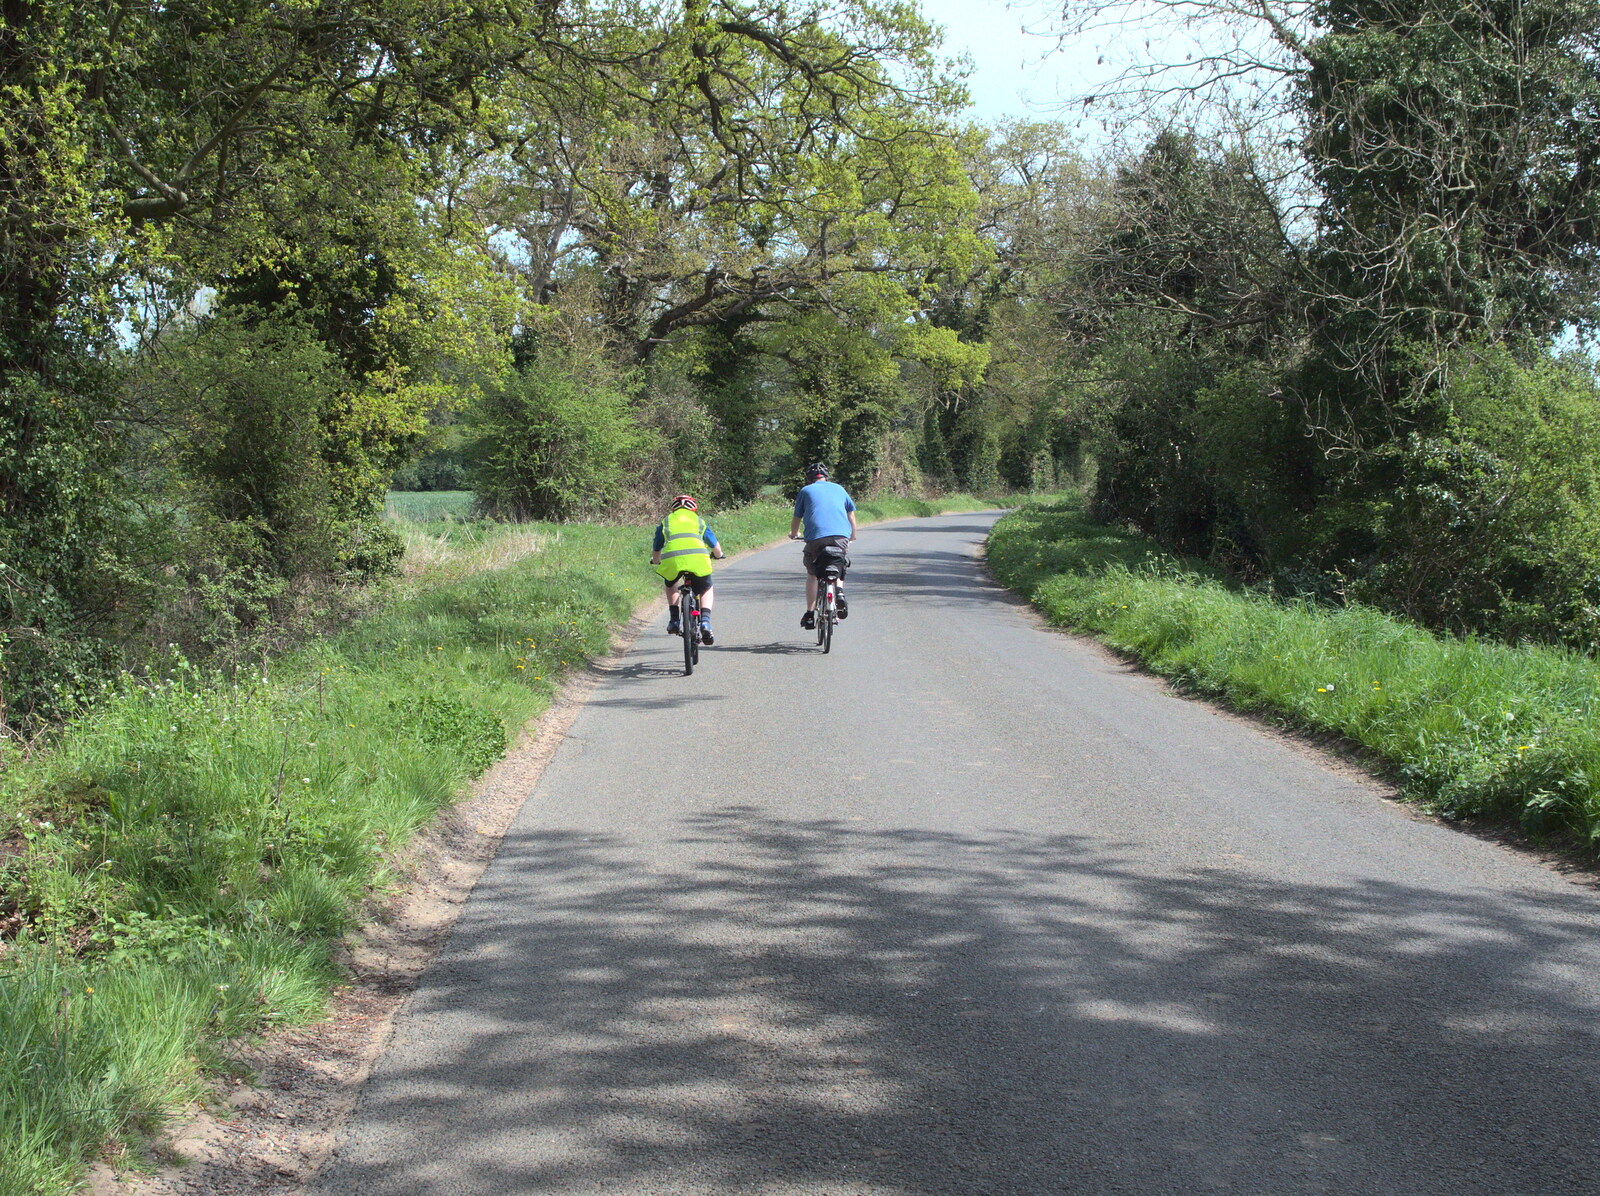 Matthew and Alan in a lane from The BSCC Cycling Weekender, Outwell, West Norfolk - 7th May 2016